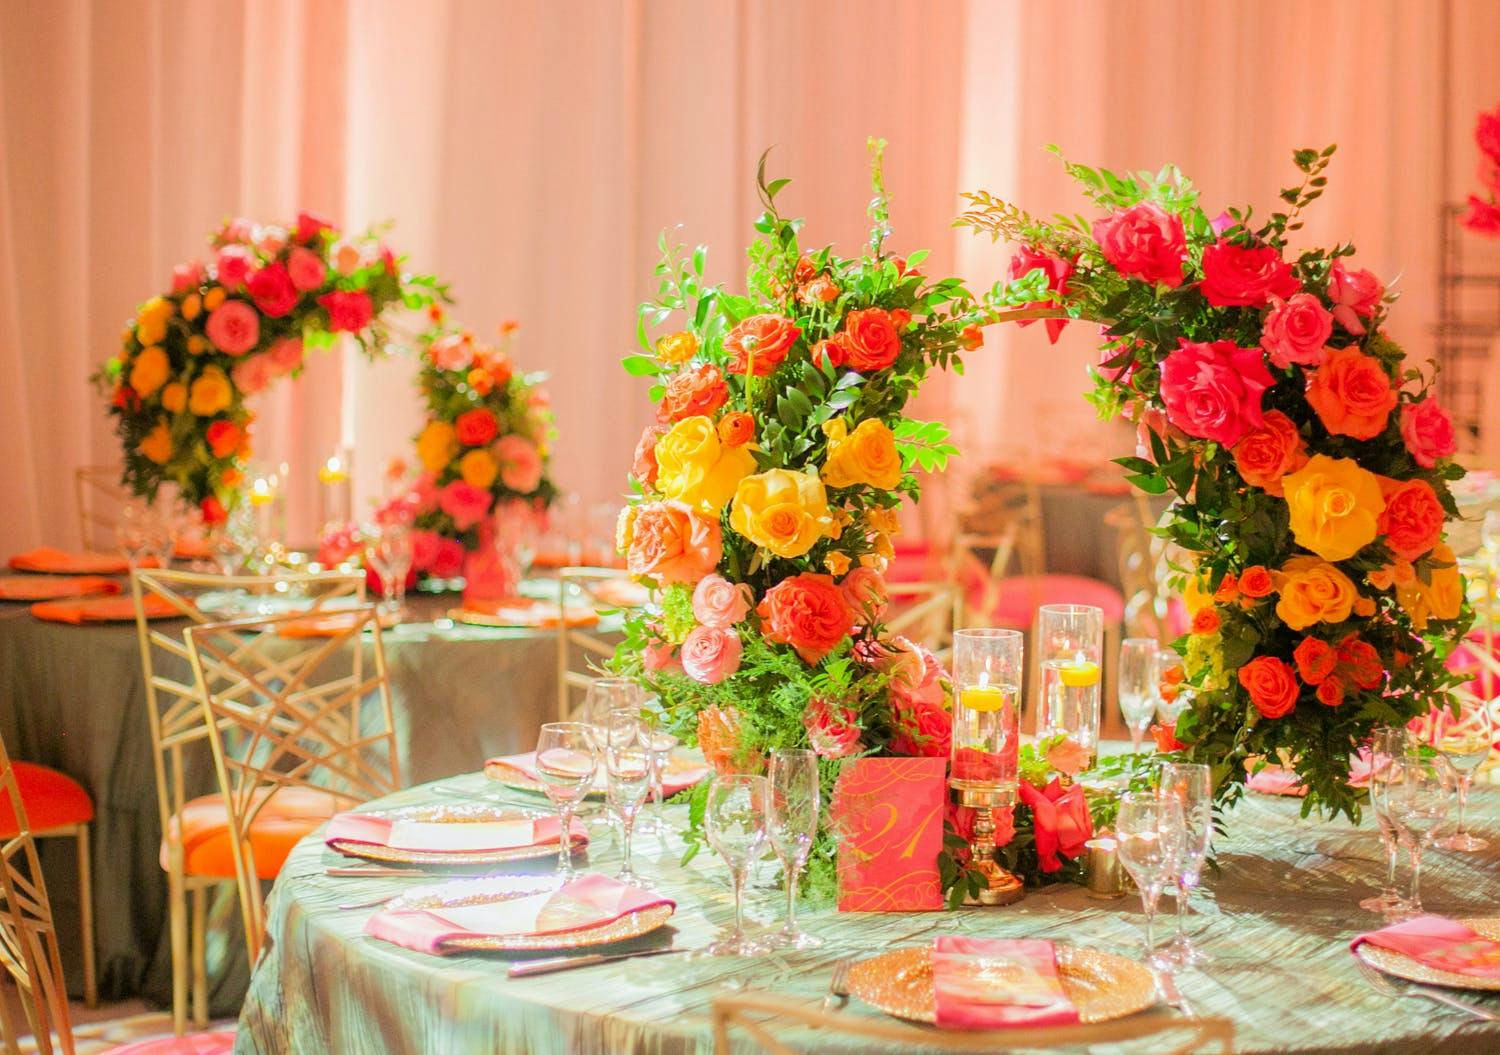 Ring-shaped centerpieces in citrus summer wedding colors | PartySlate